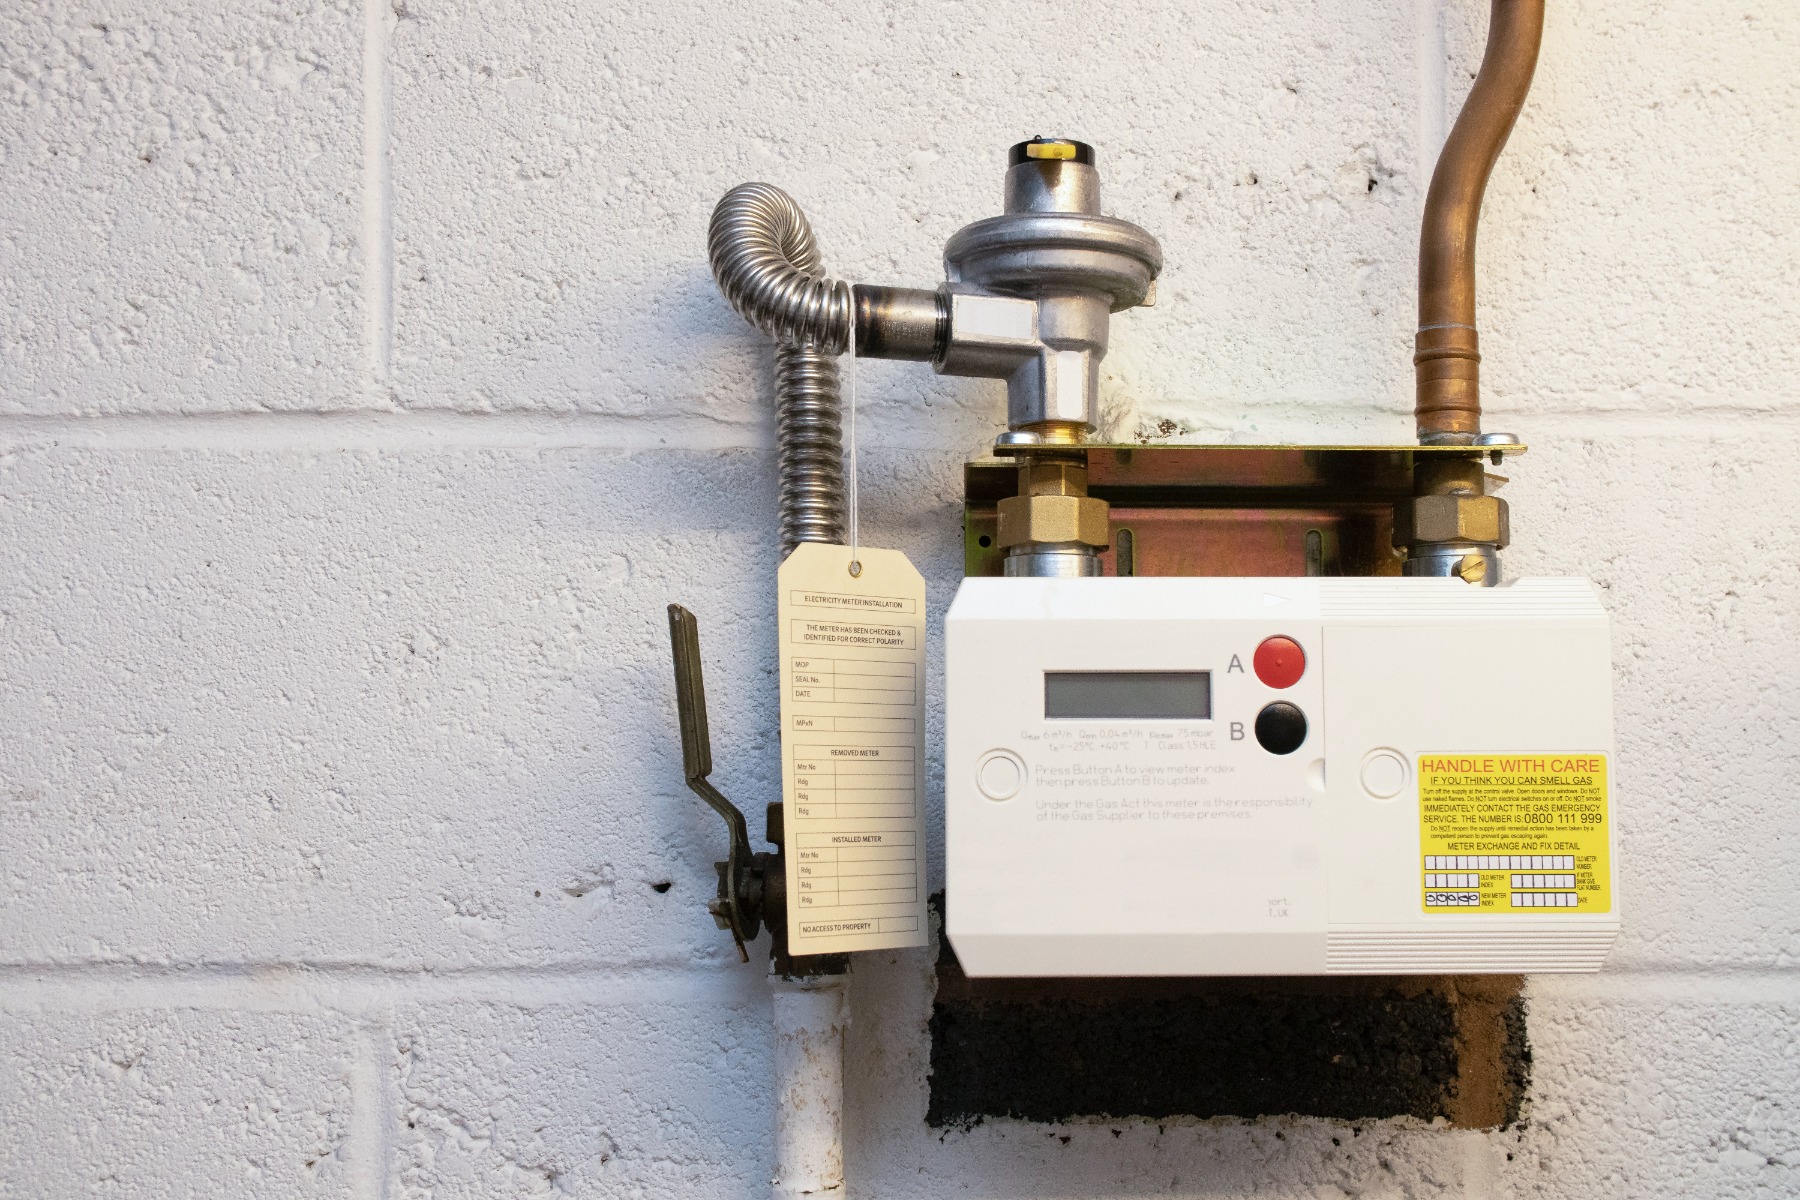 Gas meter installed on the wall